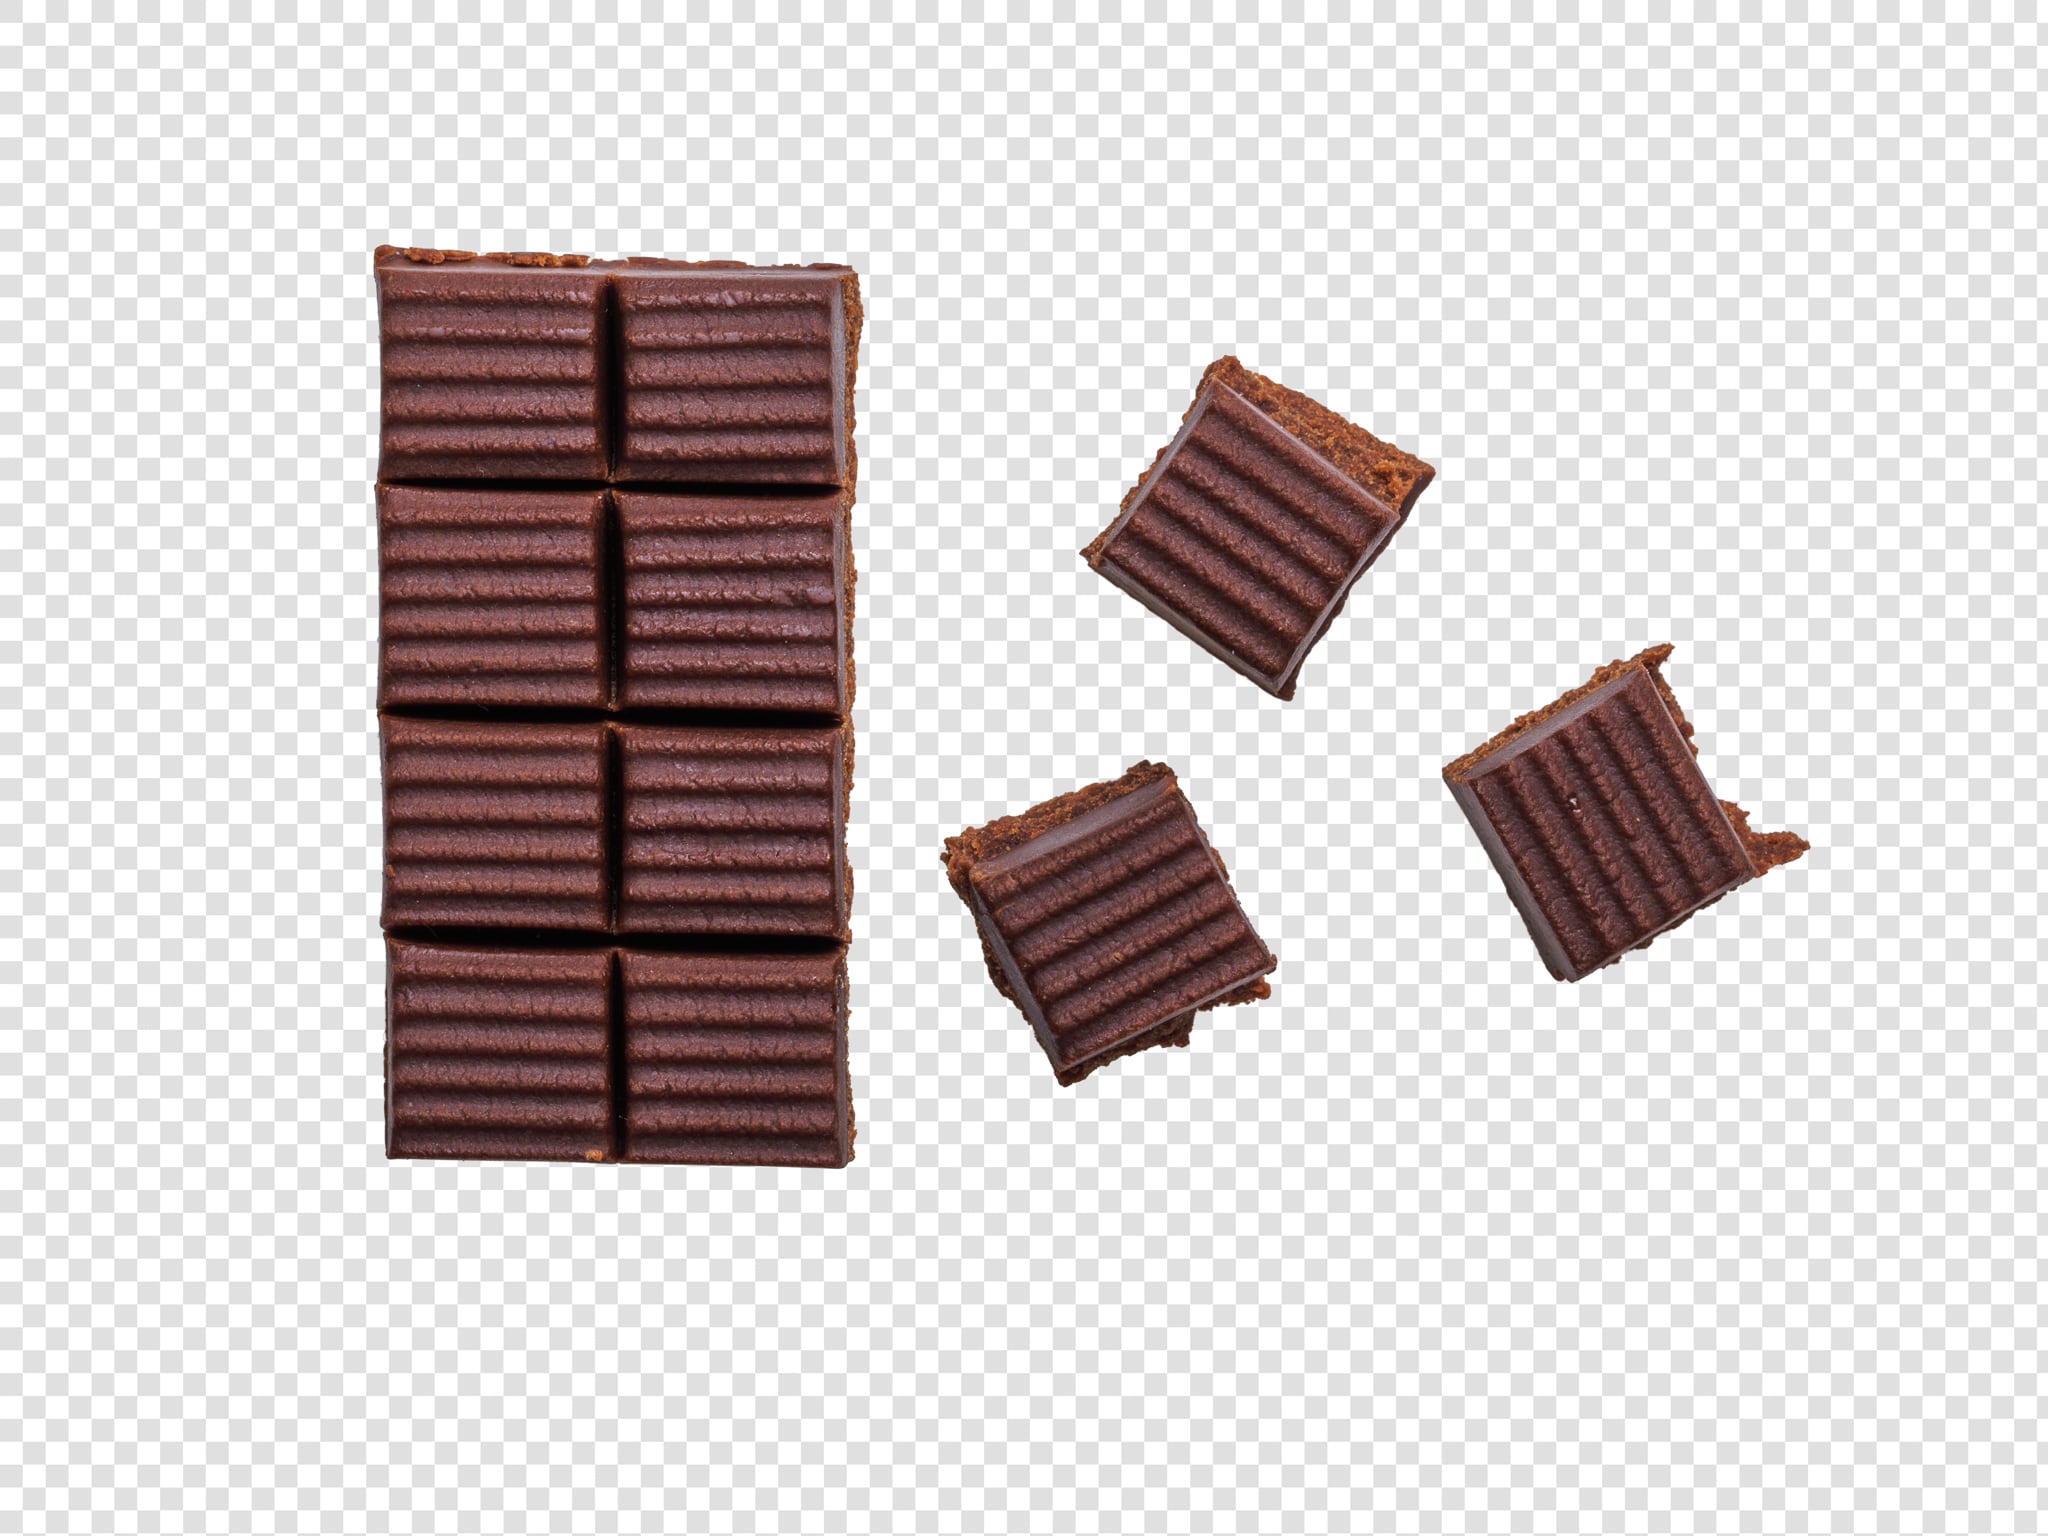 Chocolate image with transparent background